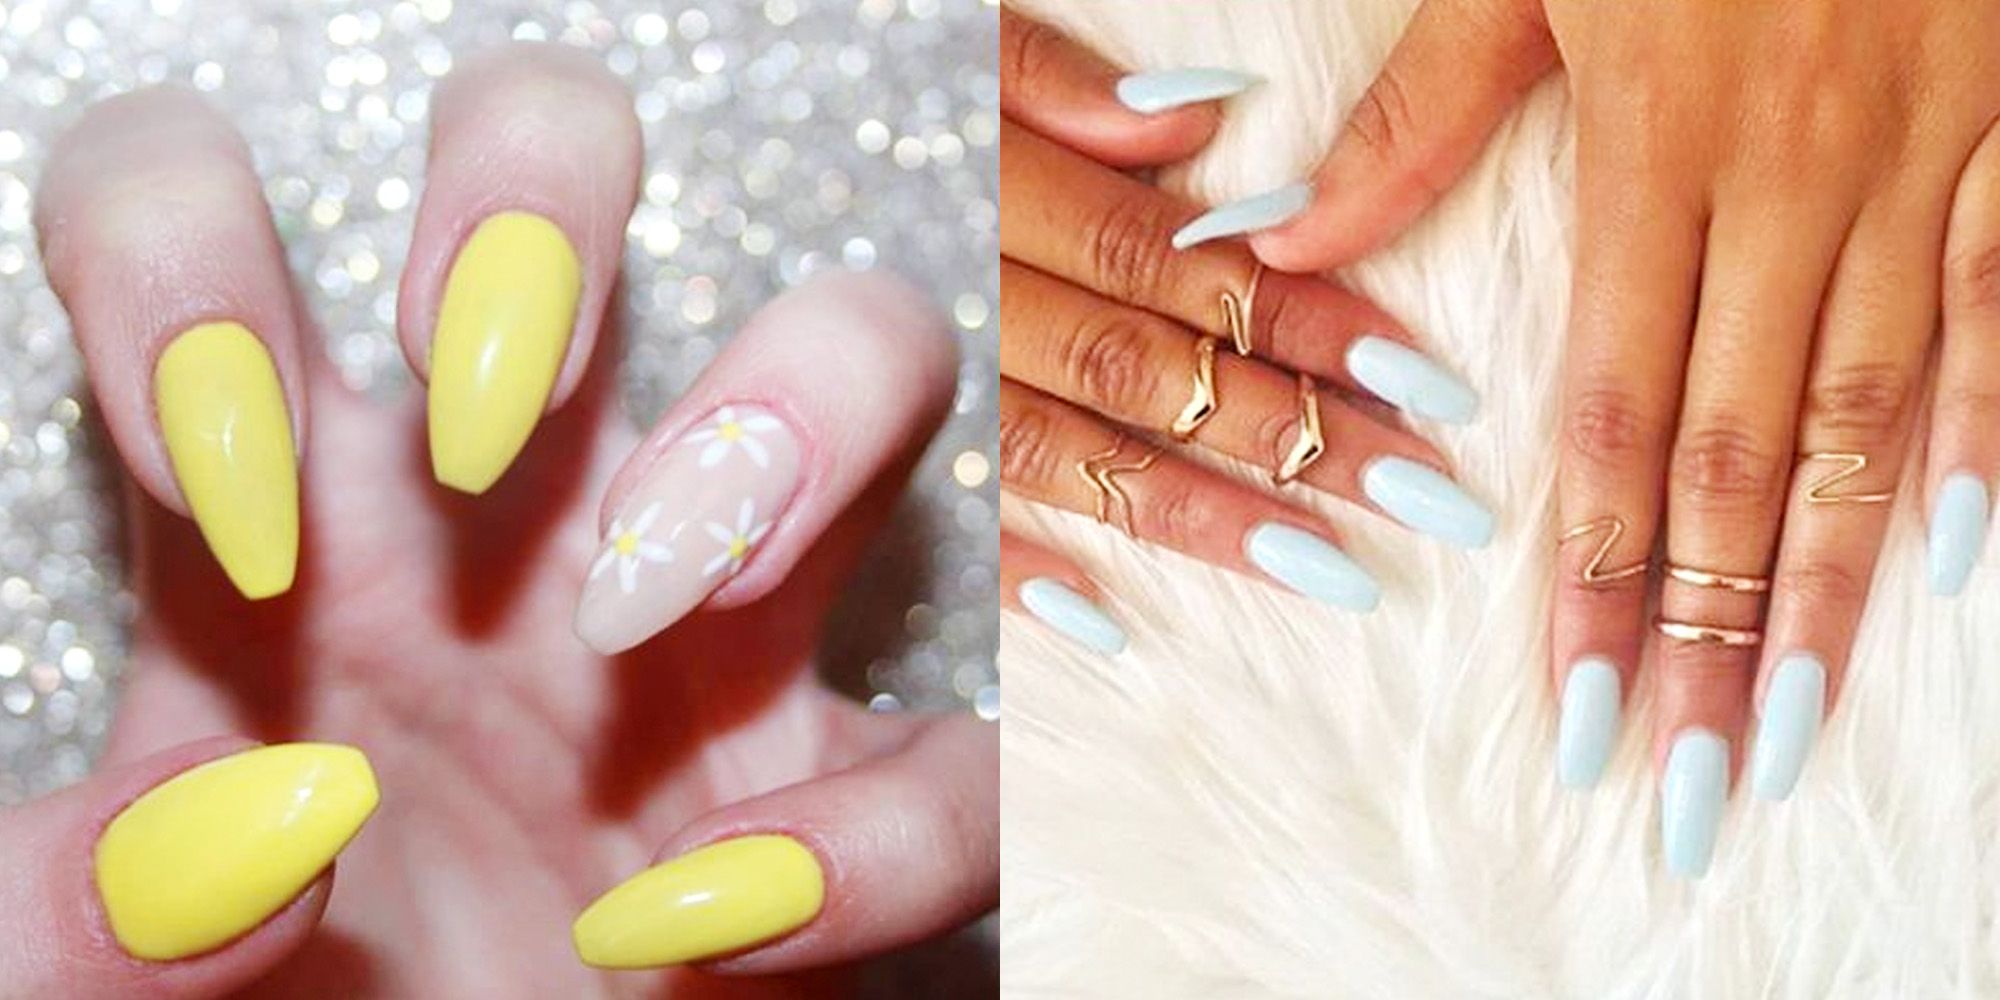 Ballerina Nail Shape: The New Manicure Trend - Your Classy Look